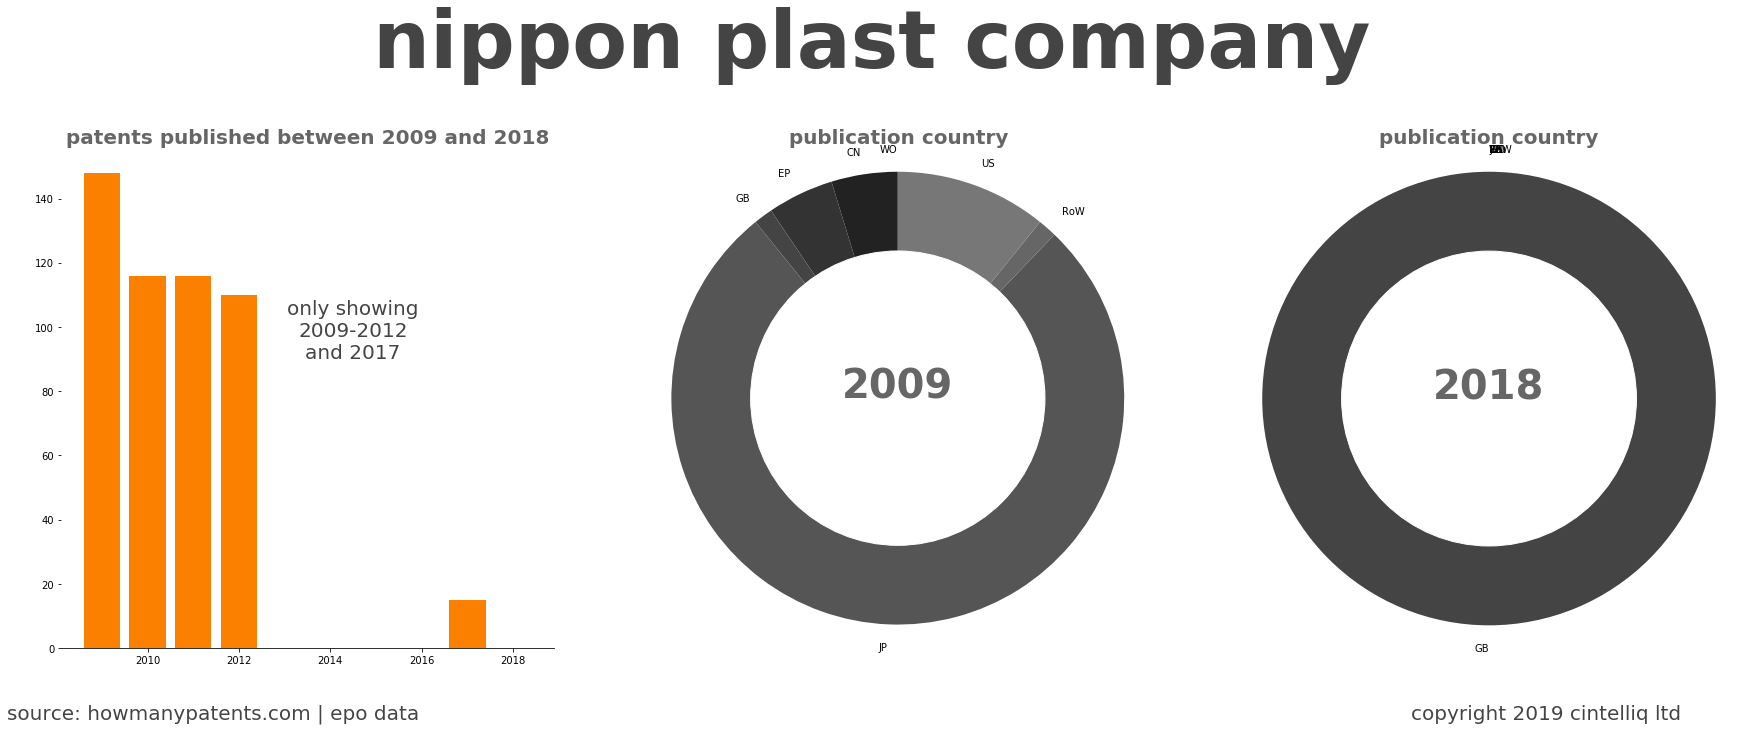 summary of patents for Nippon Plast Company